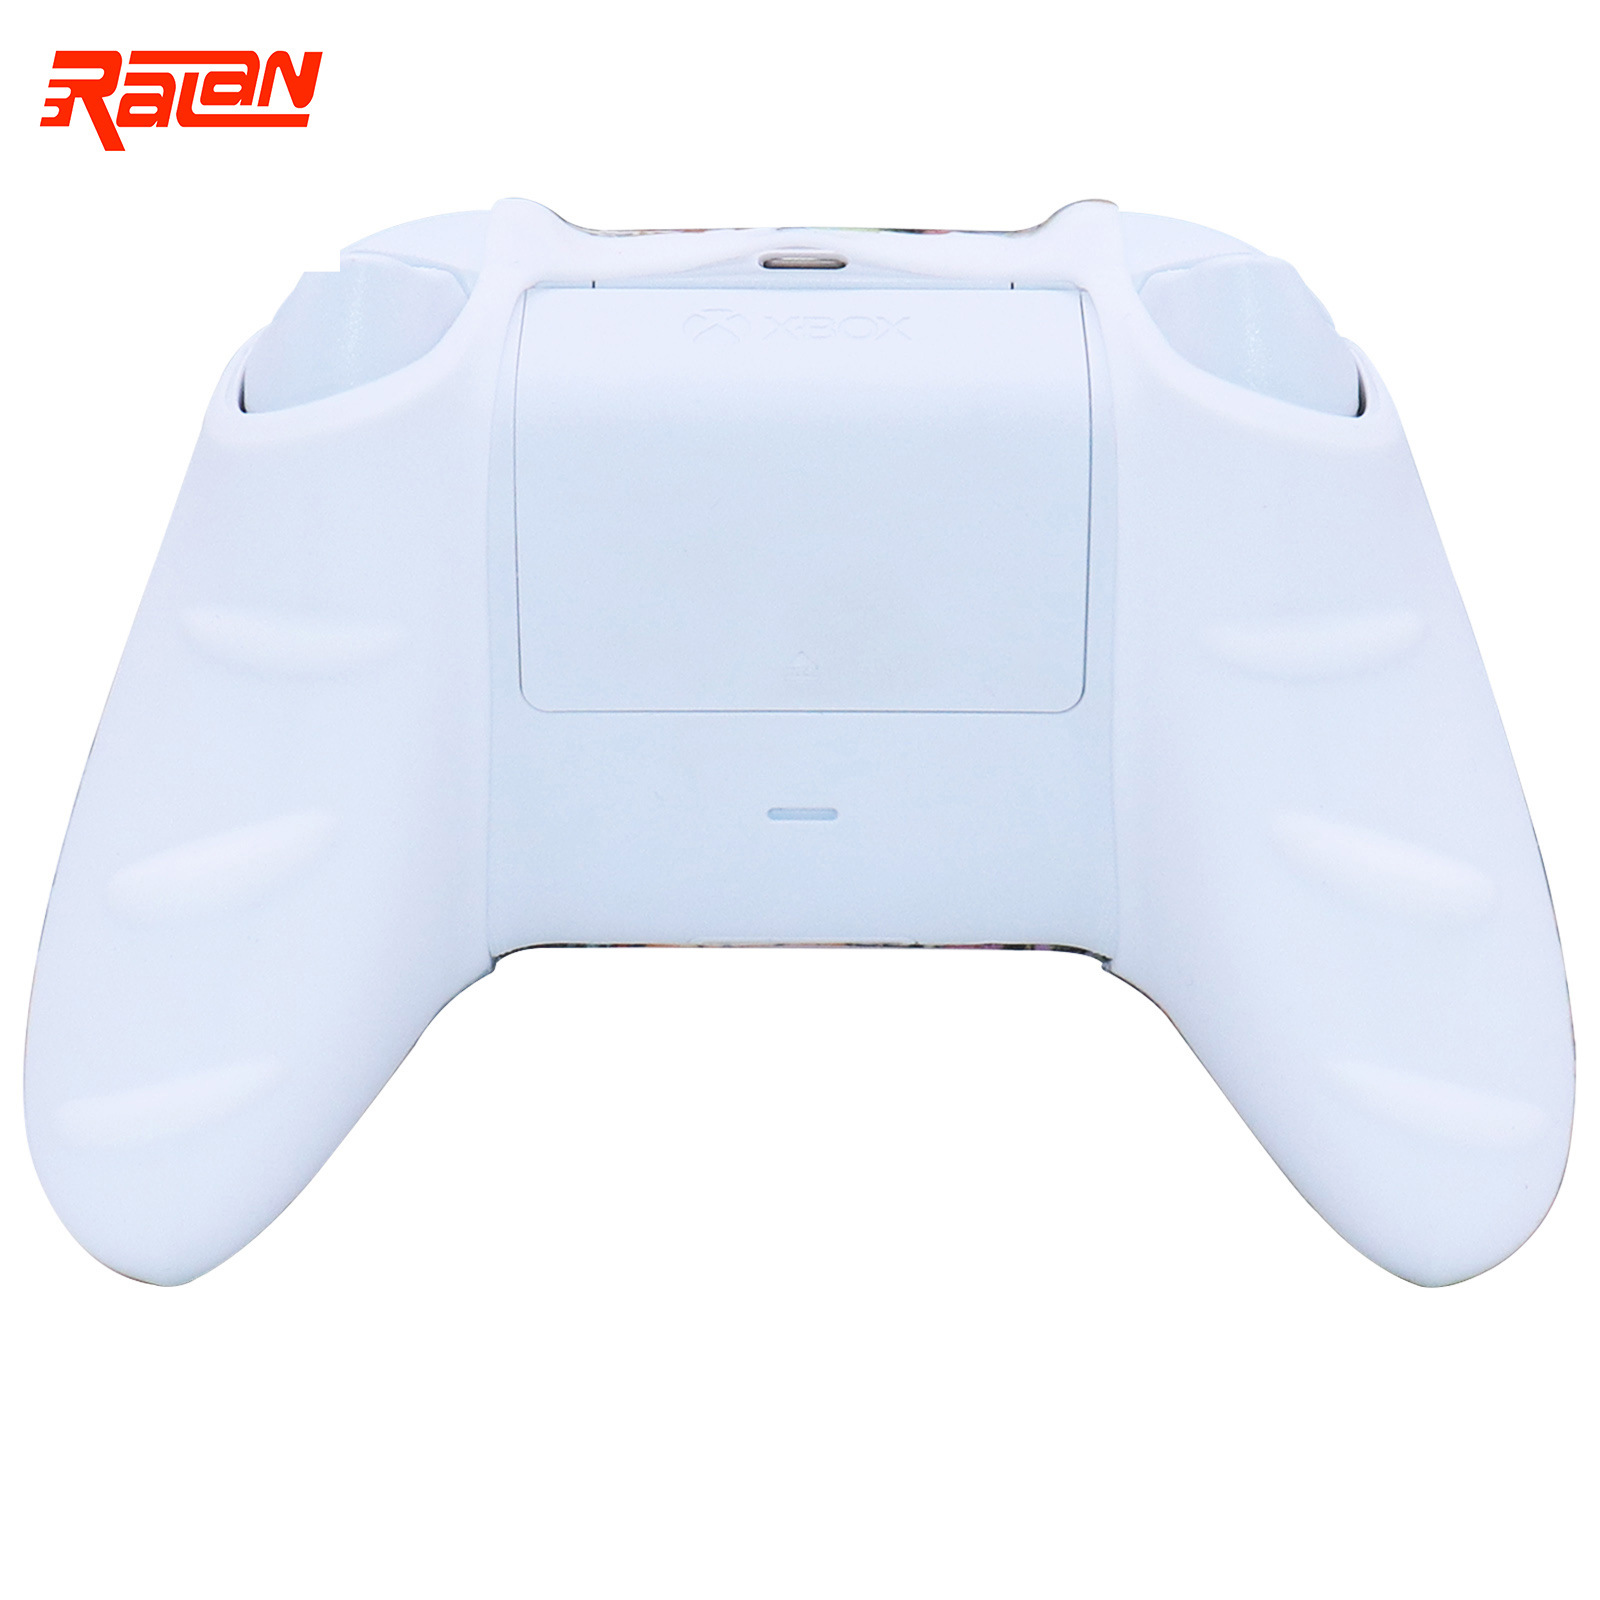 RALAN-Anti-slip-Soft-Silicone-Protective-Case-Cover-Skins-for-Microsoft-Xbox-Series-S-X-Game-Control-1922447-2